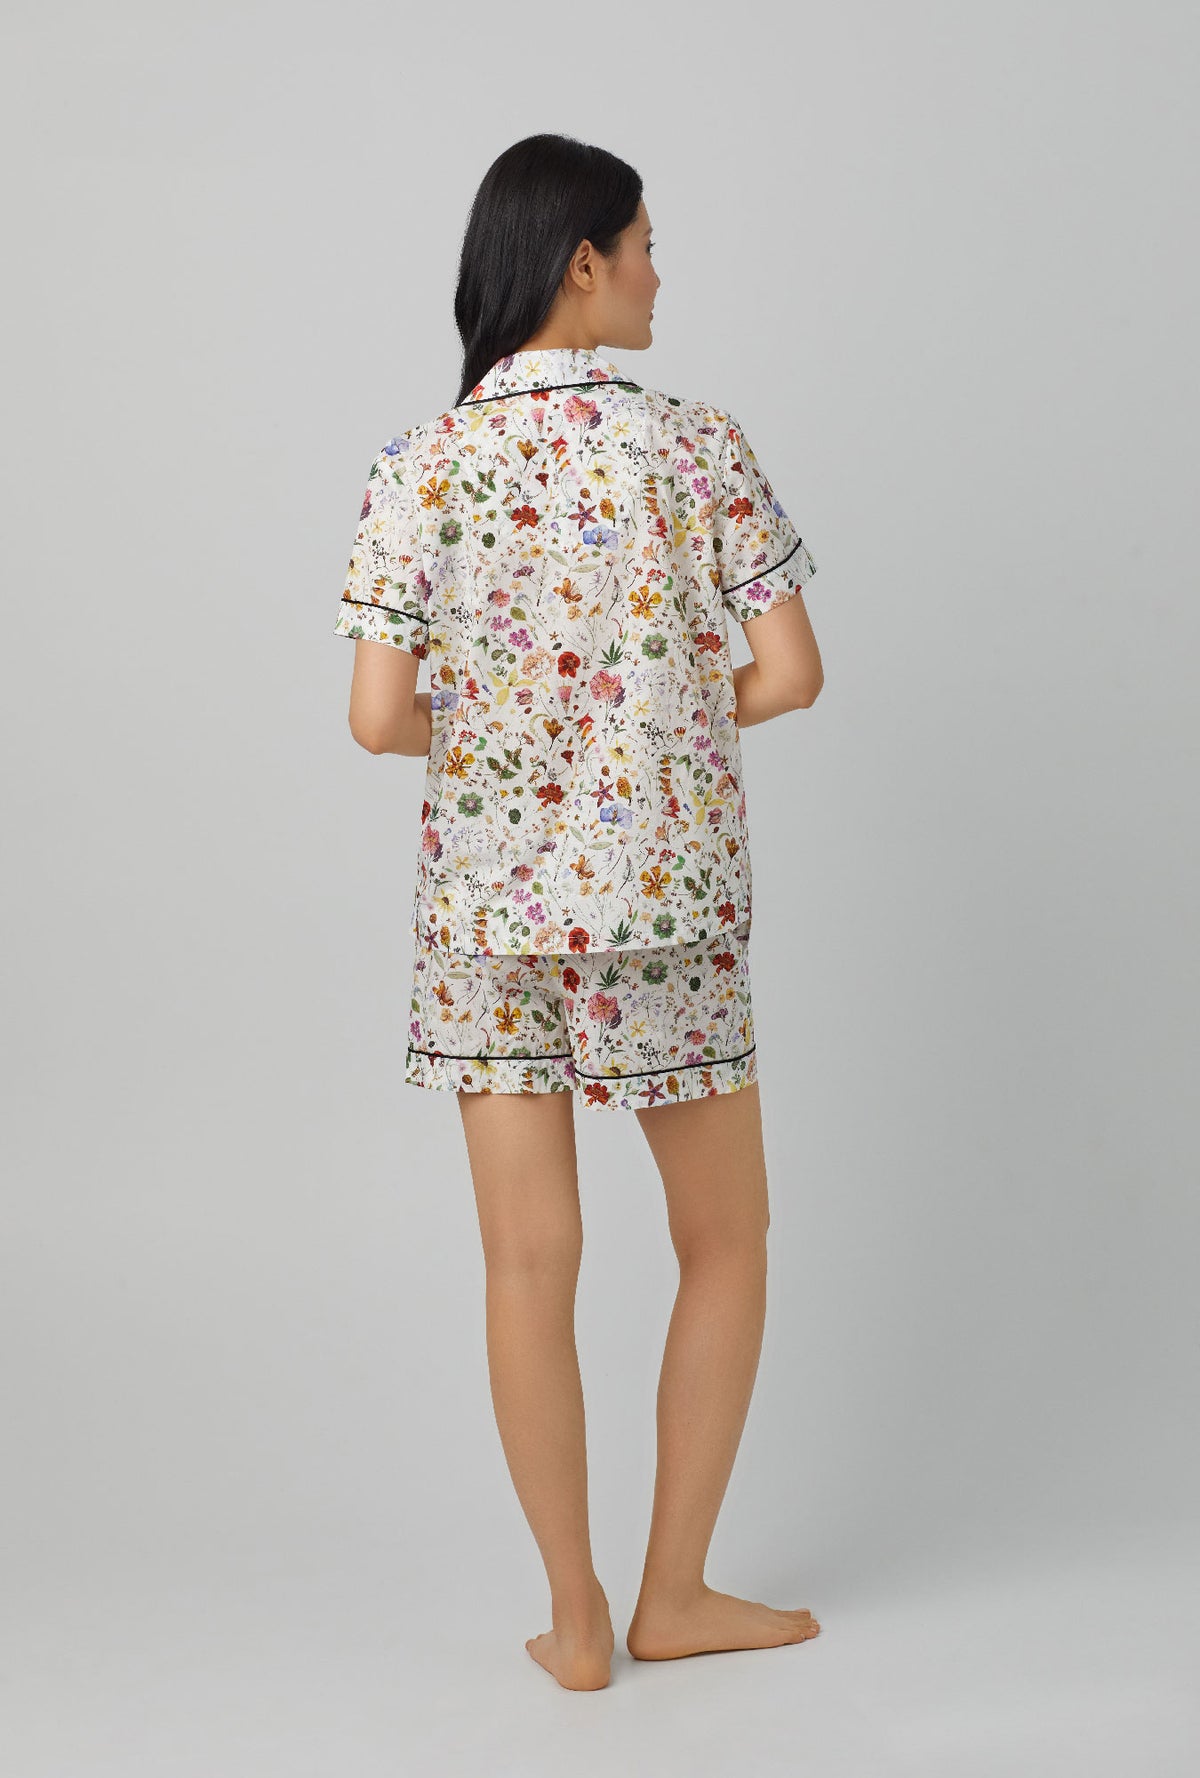 A lady wearing short sleeve classic short pj set with floral eve print